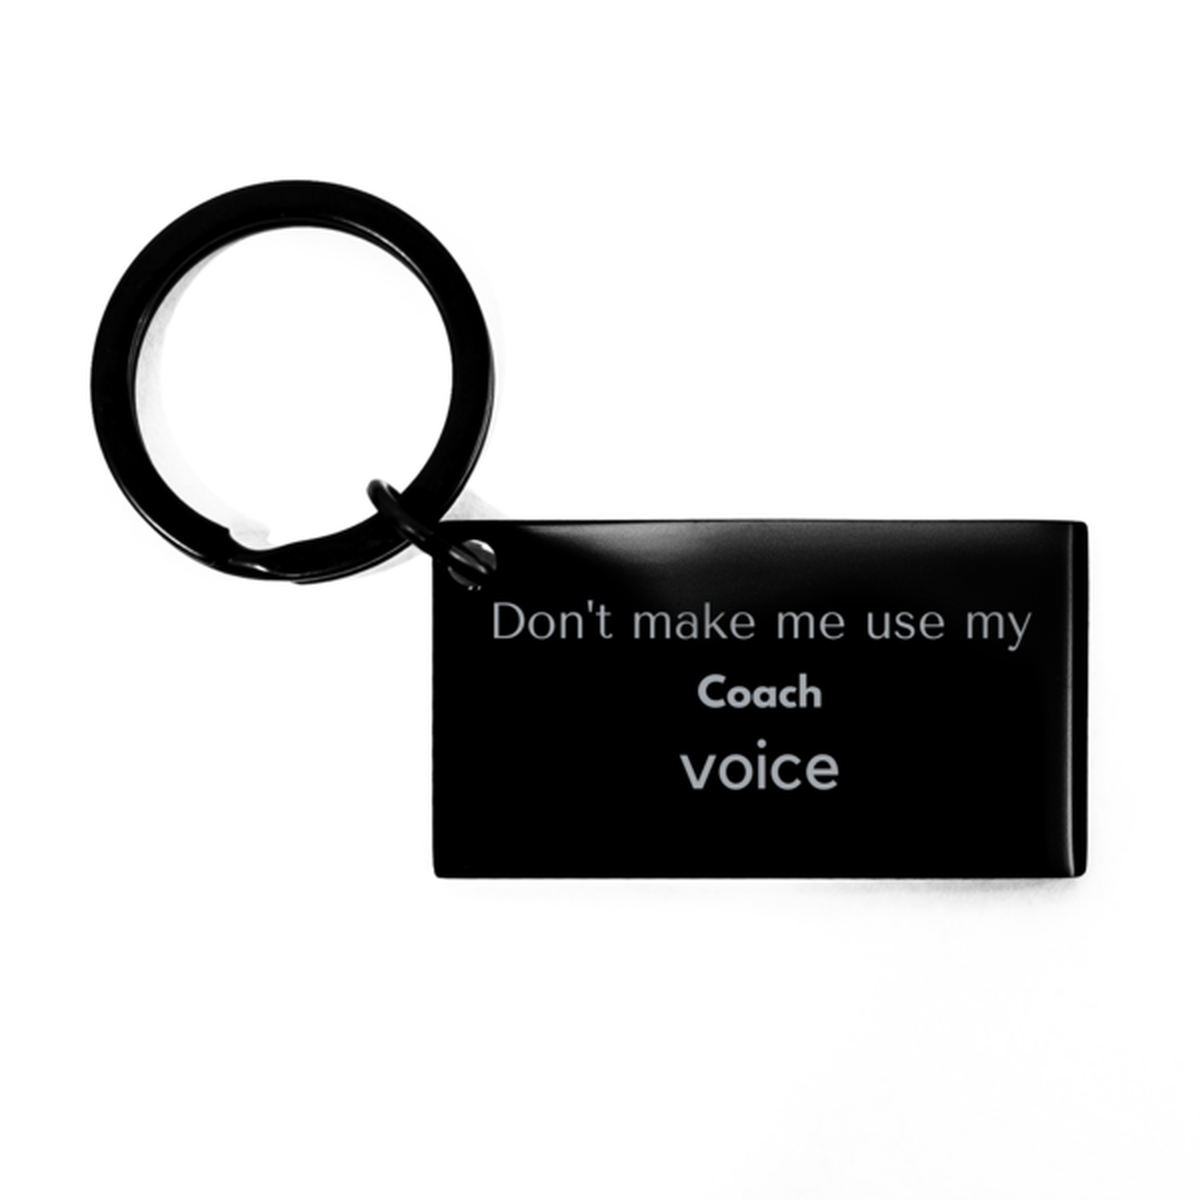 Don't make me use my Coach voice, Sarcasm Coach Gifts, Christmas Coach Keychain Birthday Unique Gifts For Coach Coworkers, Men, Women, Colleague, Friends